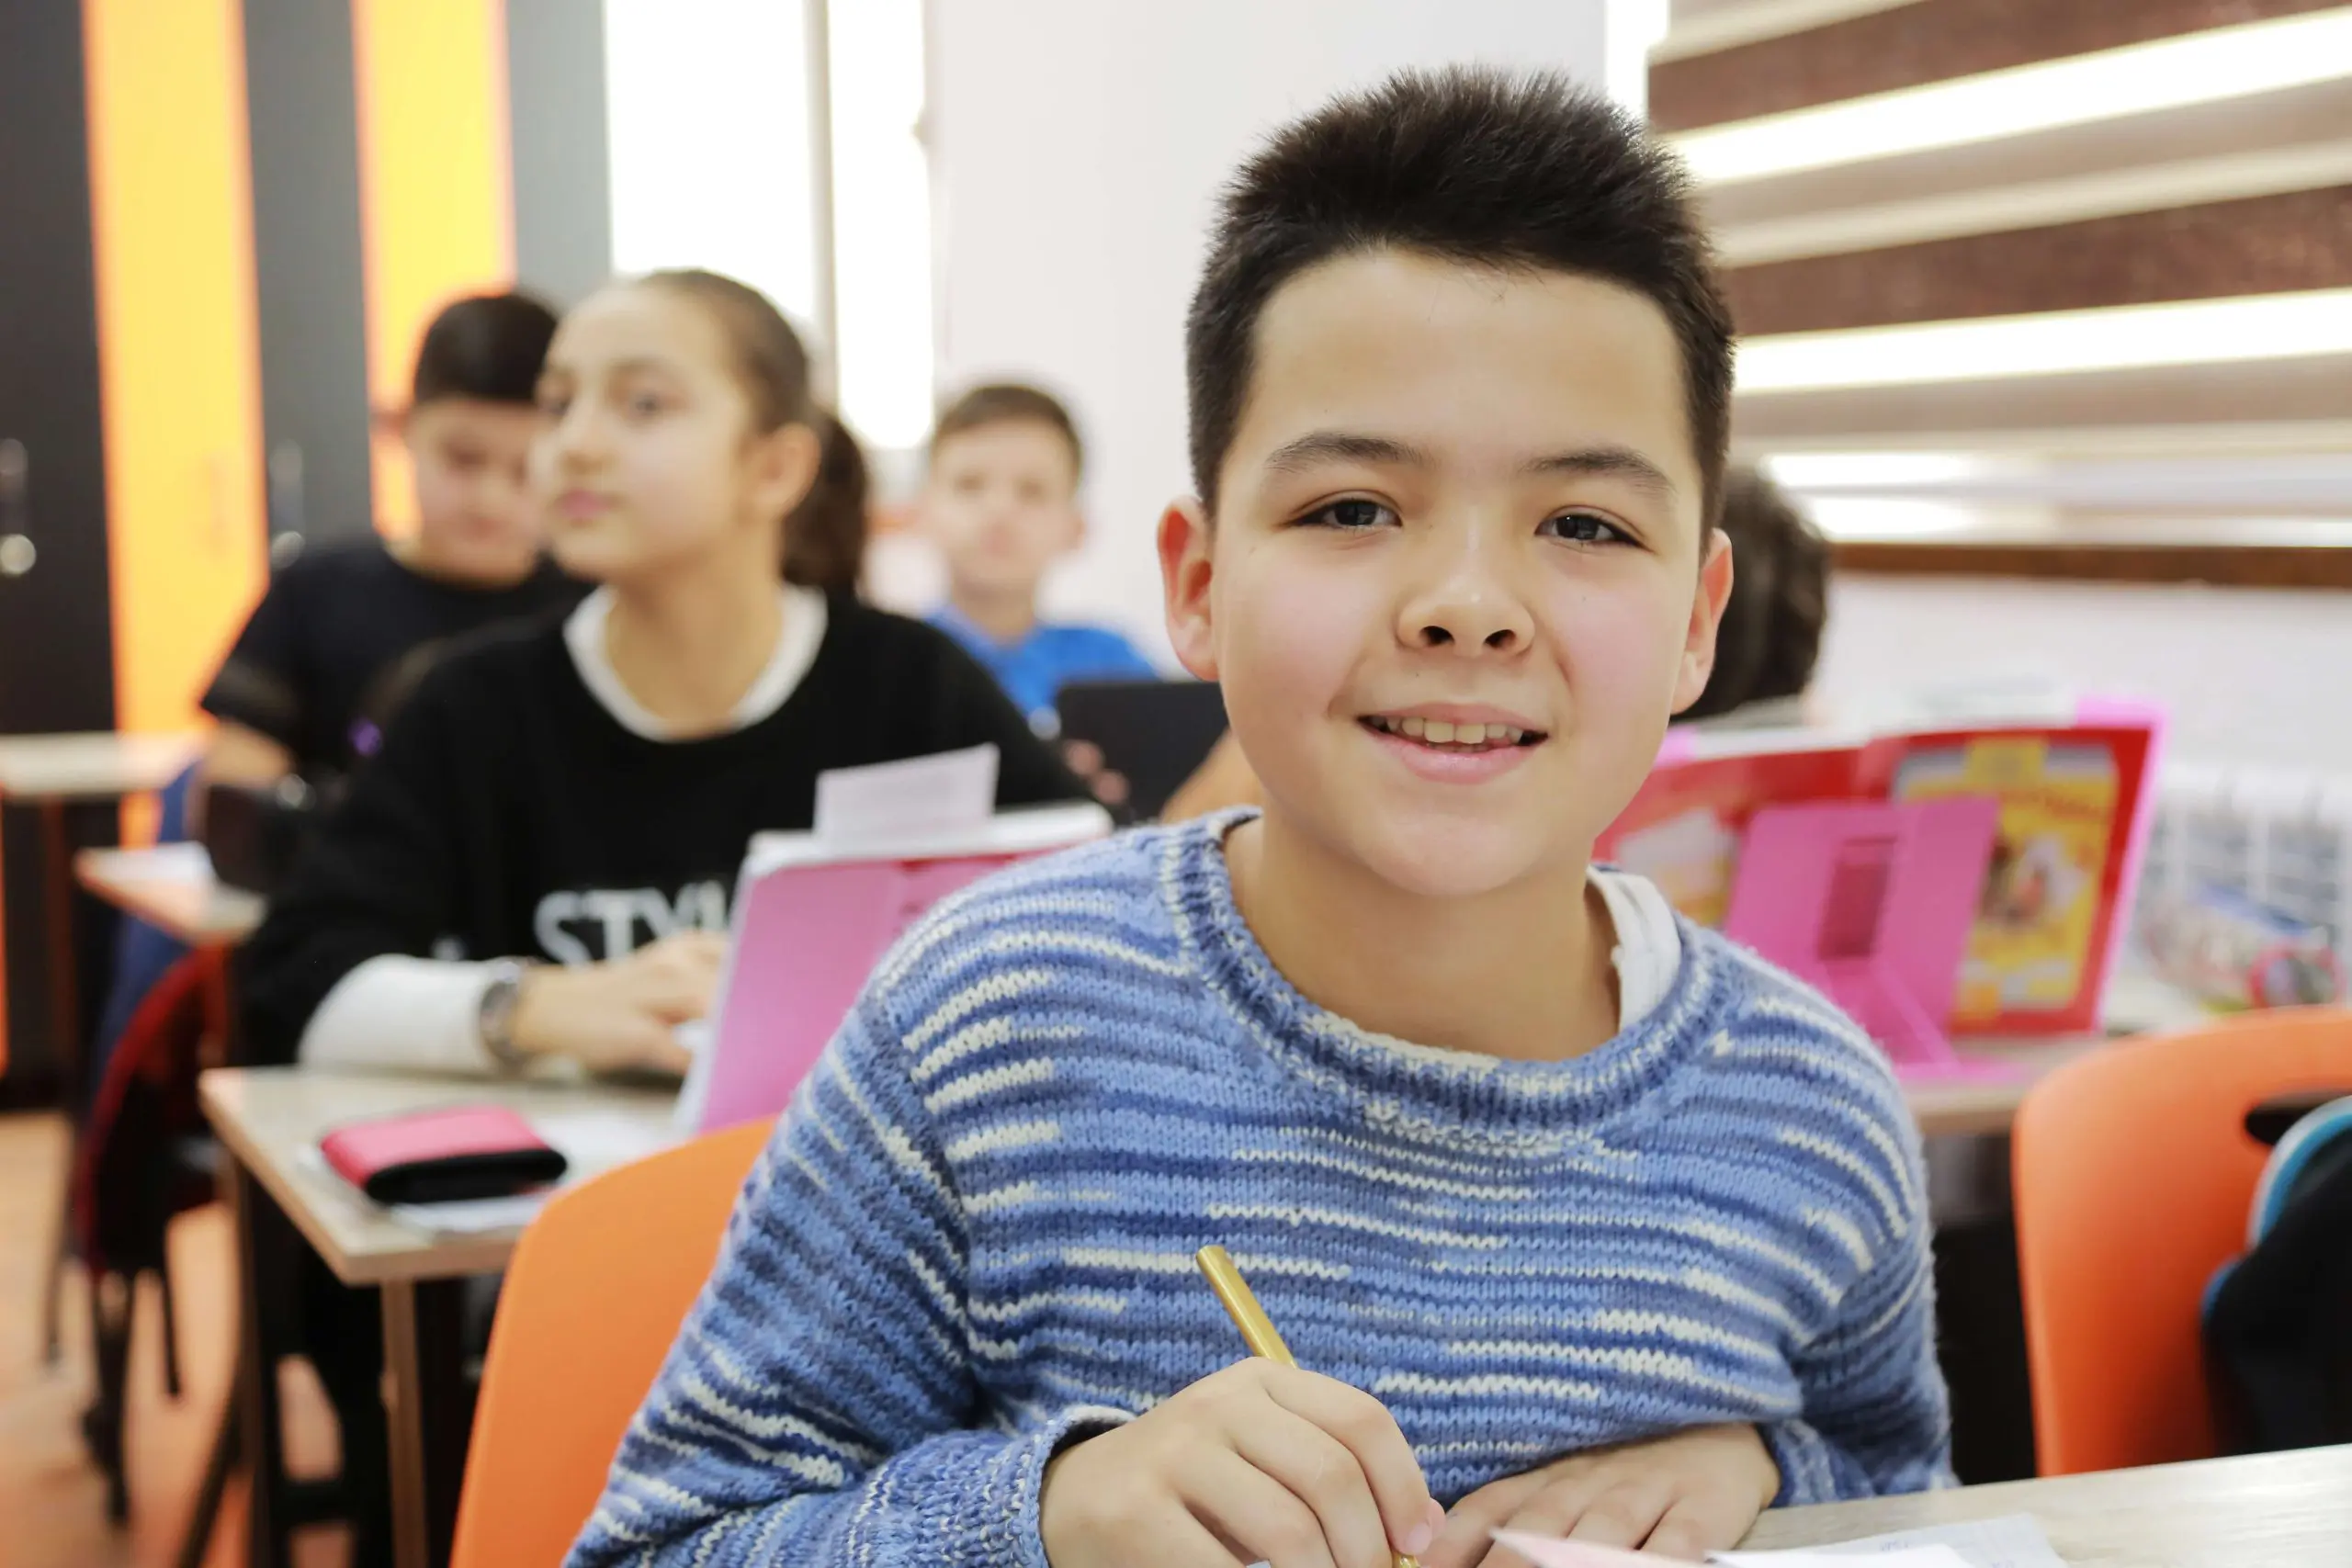 Elementary students in a classroom write and draw while using images in reference books. A boy in center frame smiles at the viewer.